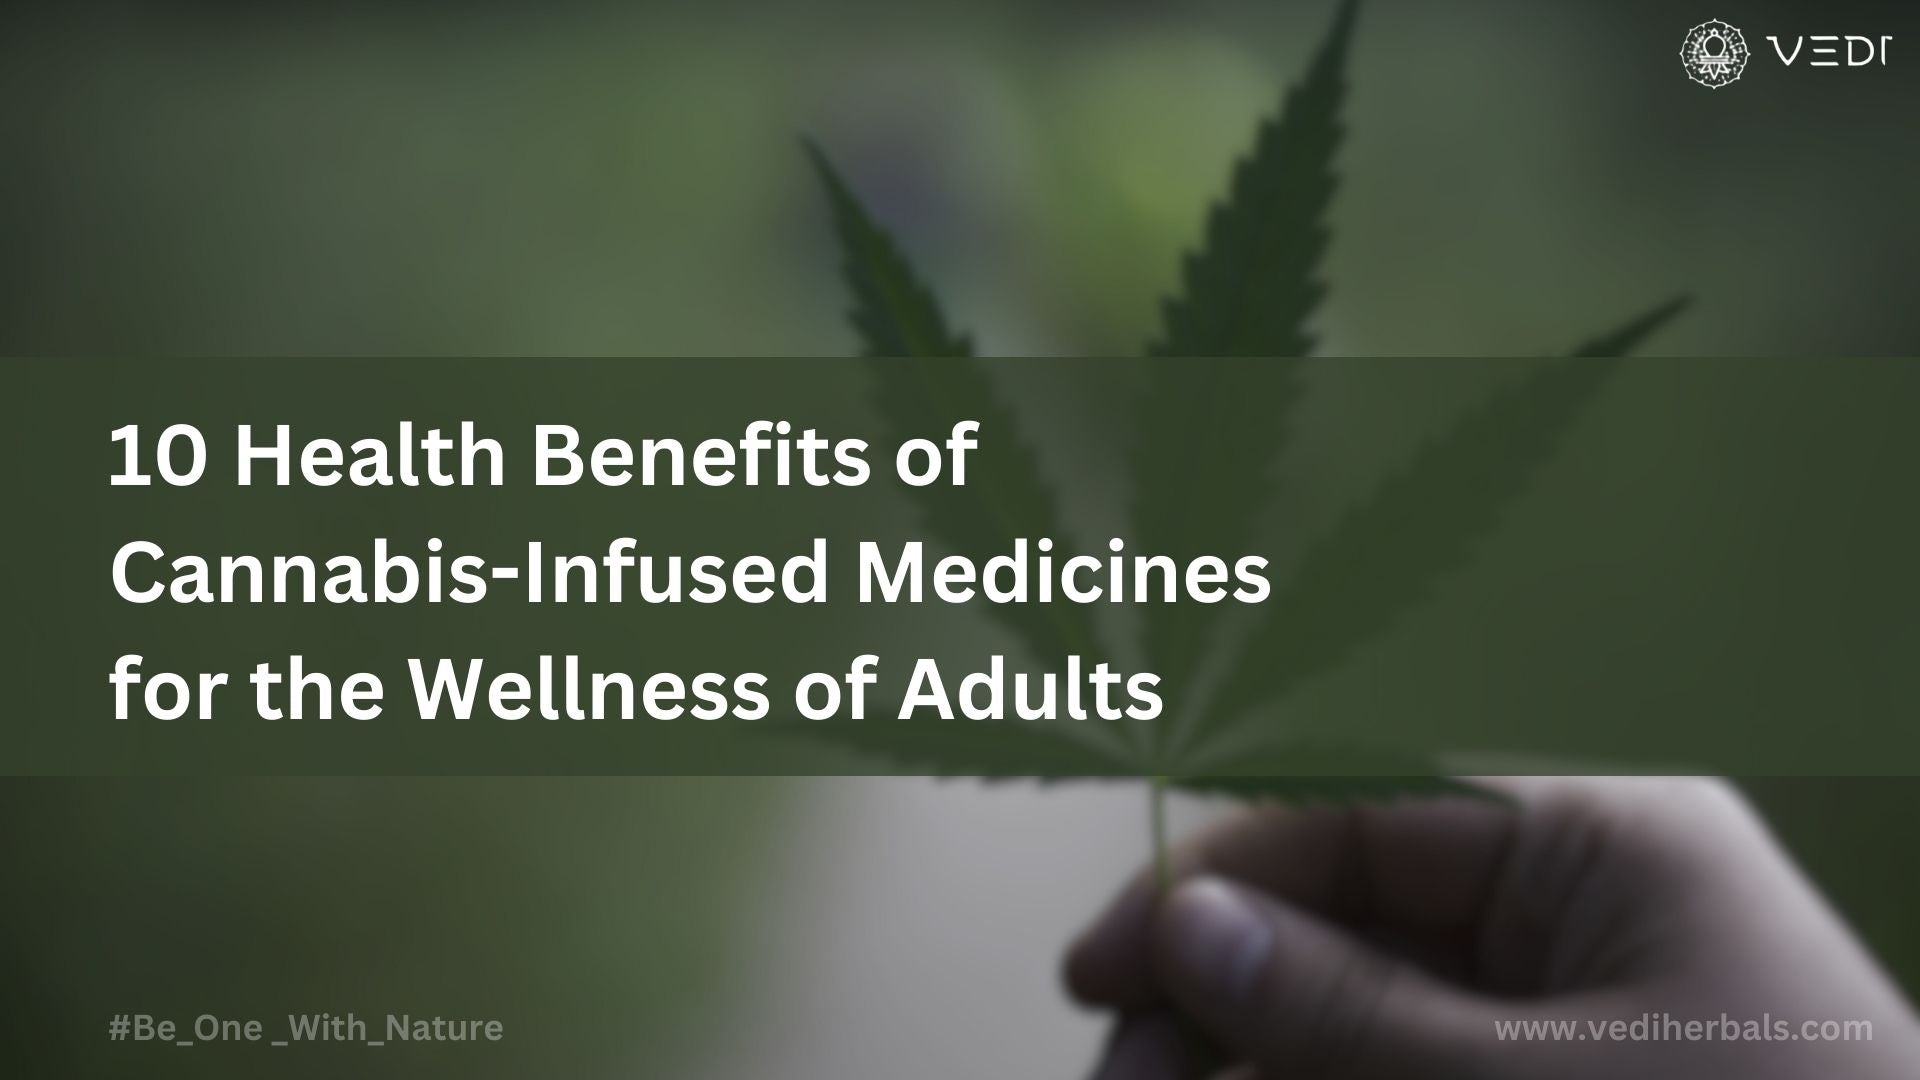 10 Health Benefits of Cannabis-Infused Medicines for the Wellness of Adults